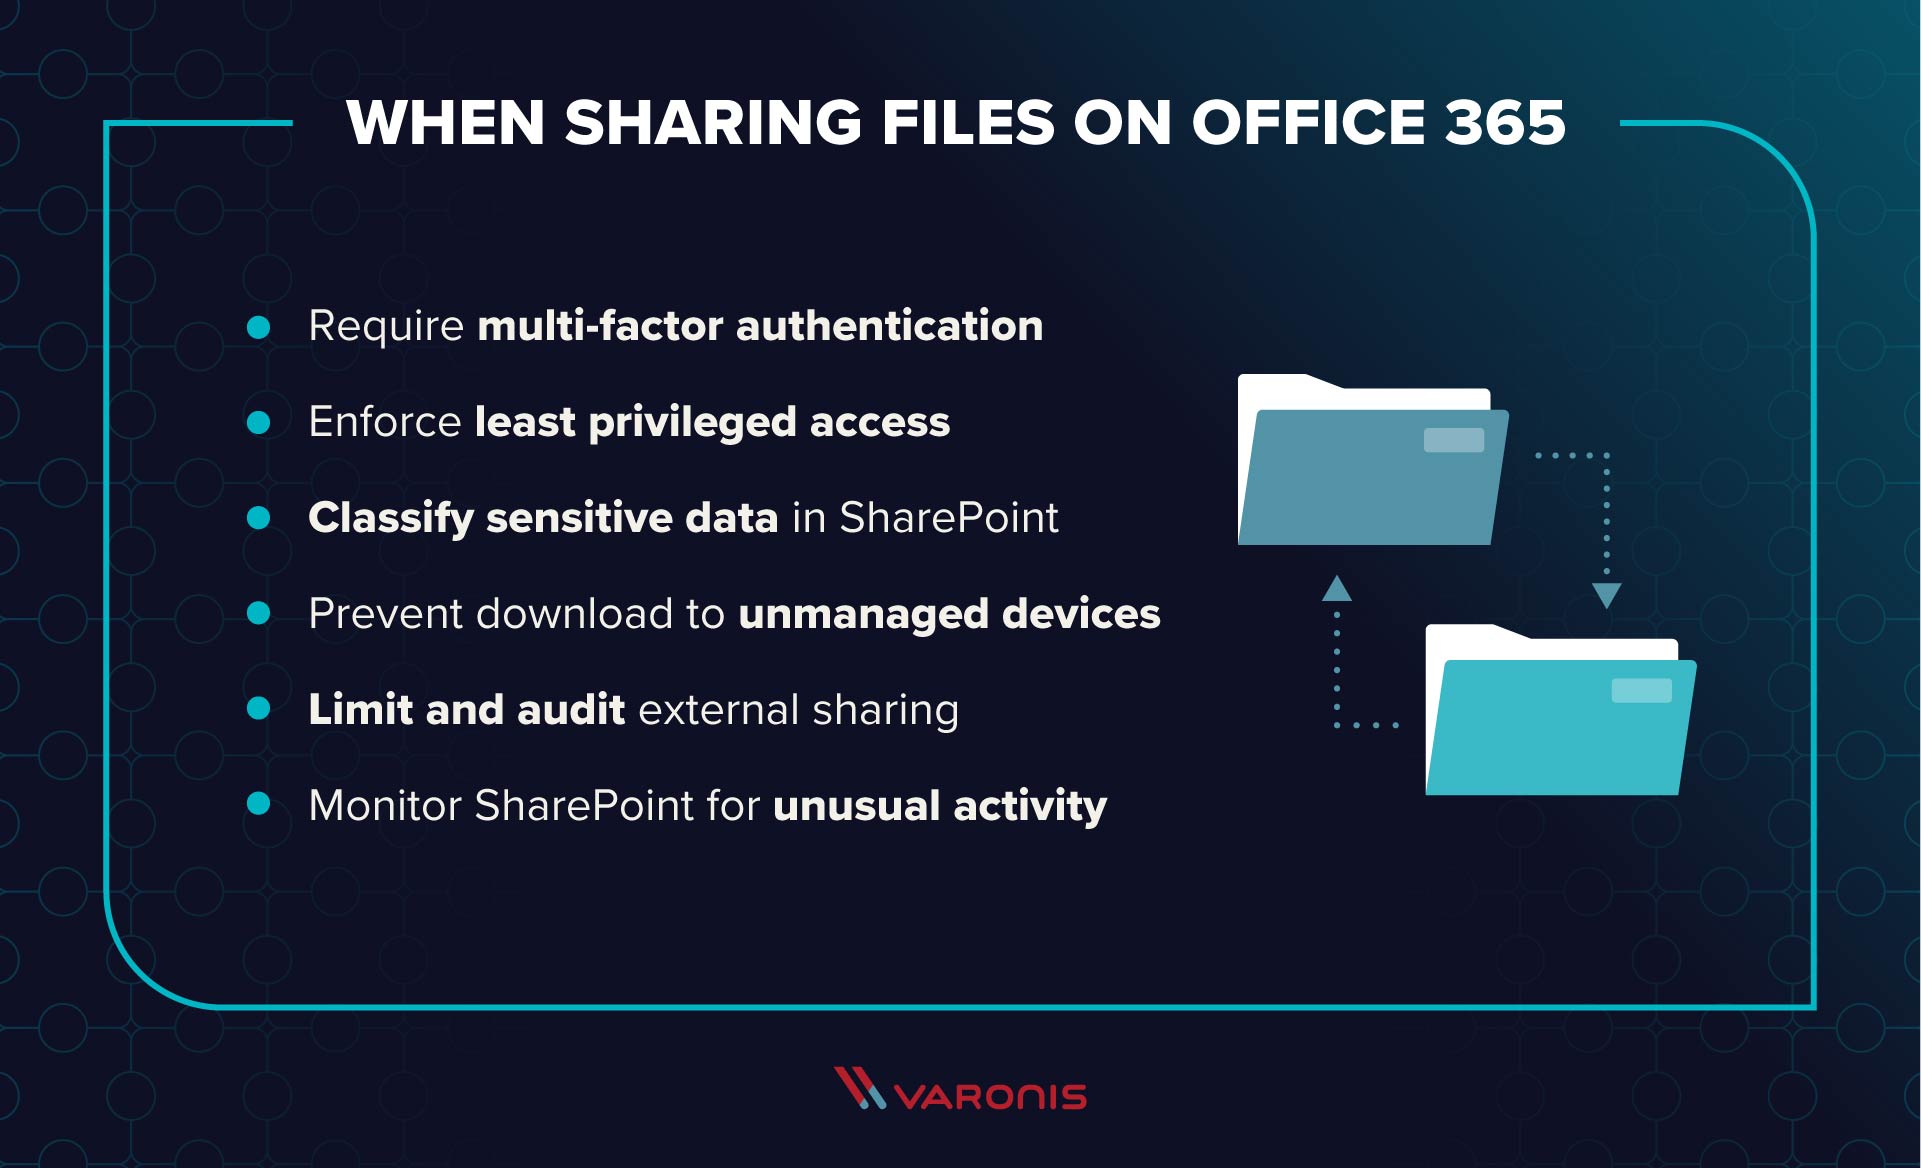 office 365 file sharing image of best file sharing practices